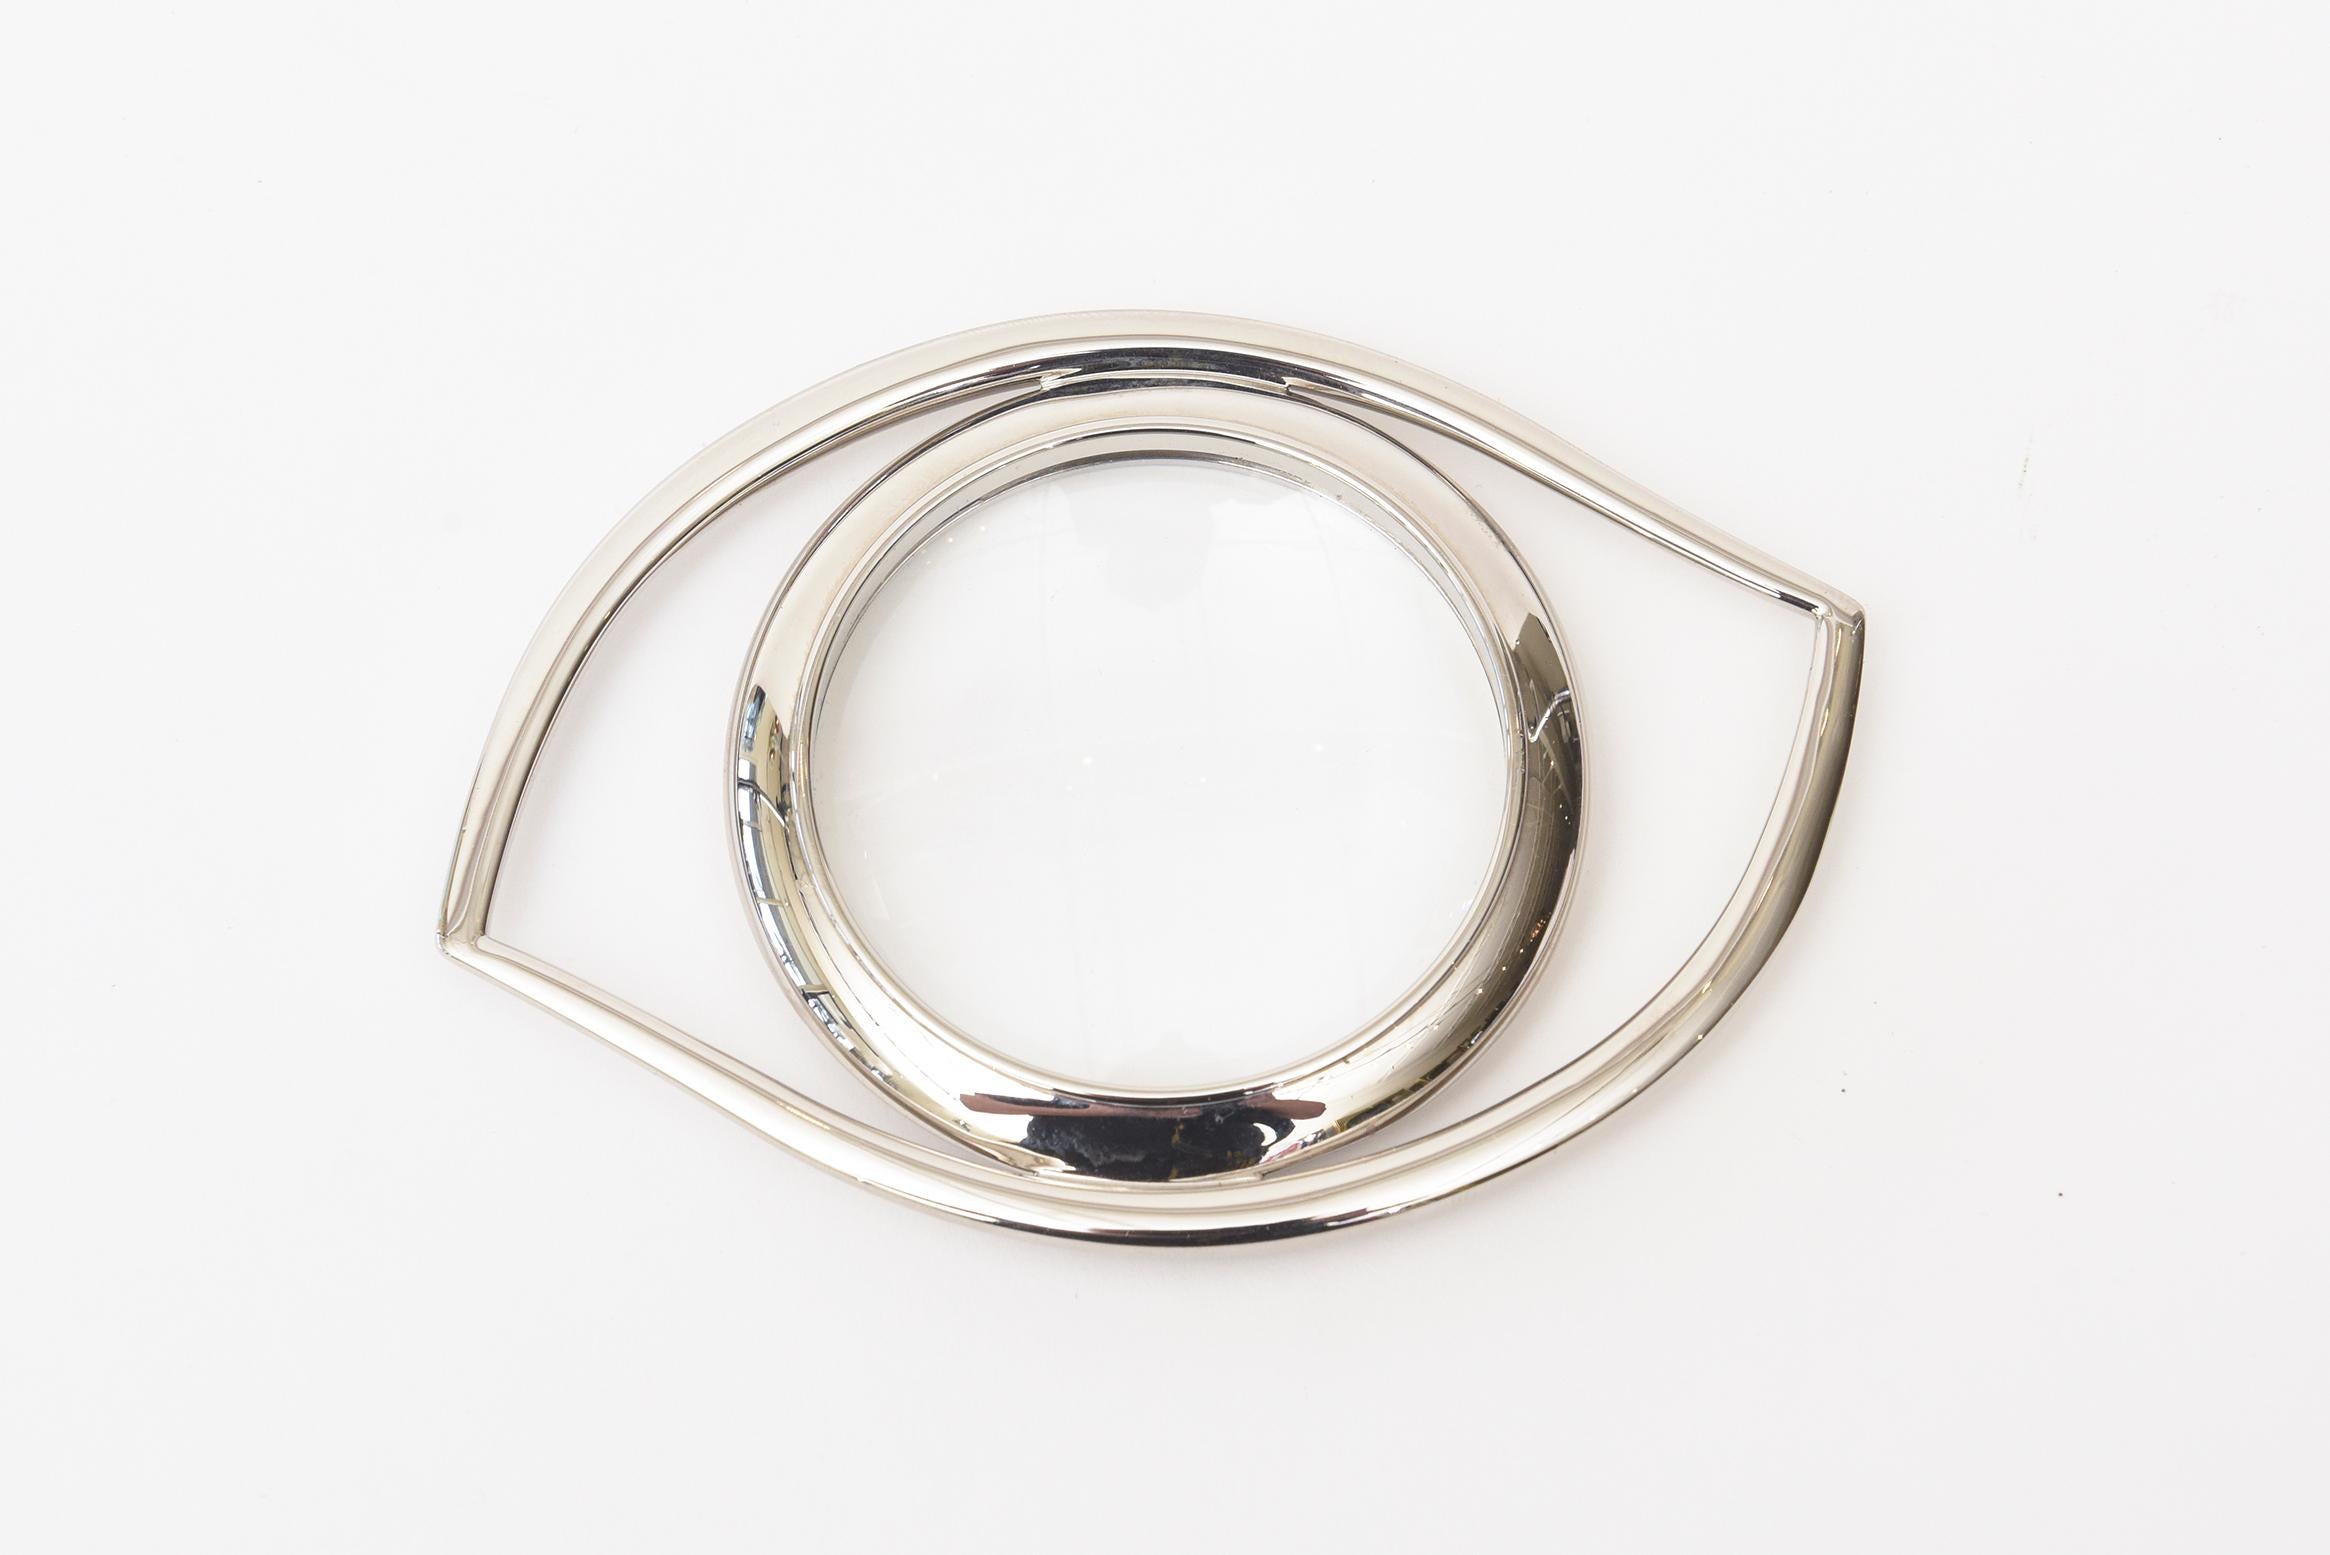 Hermès Cleopatra Eye Magnifier Silver Plated Vintage Desk Accessory In Good Condition For Sale In North Miami, FL